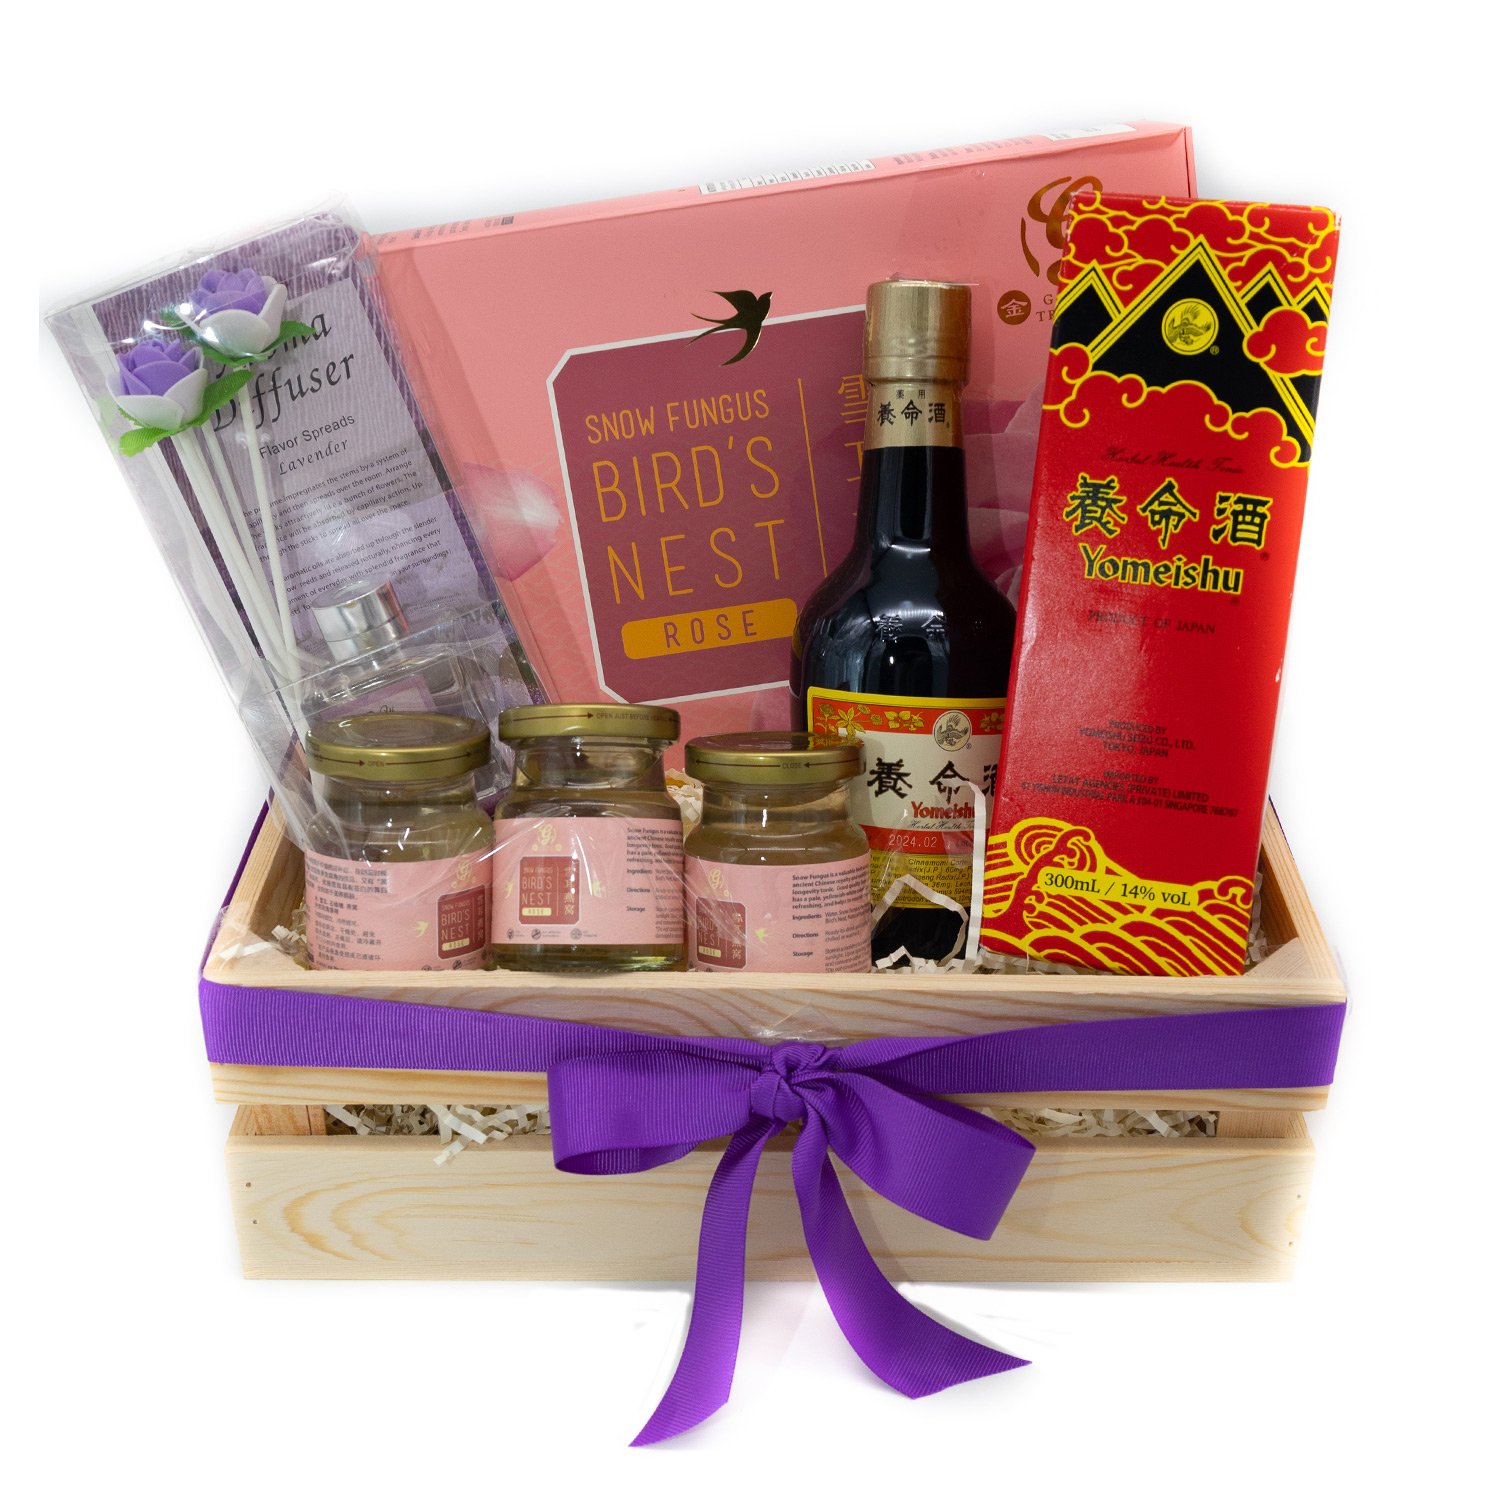 Packed with Love to Celebrate W-Day - Top 5 Women's Day Gift Basket